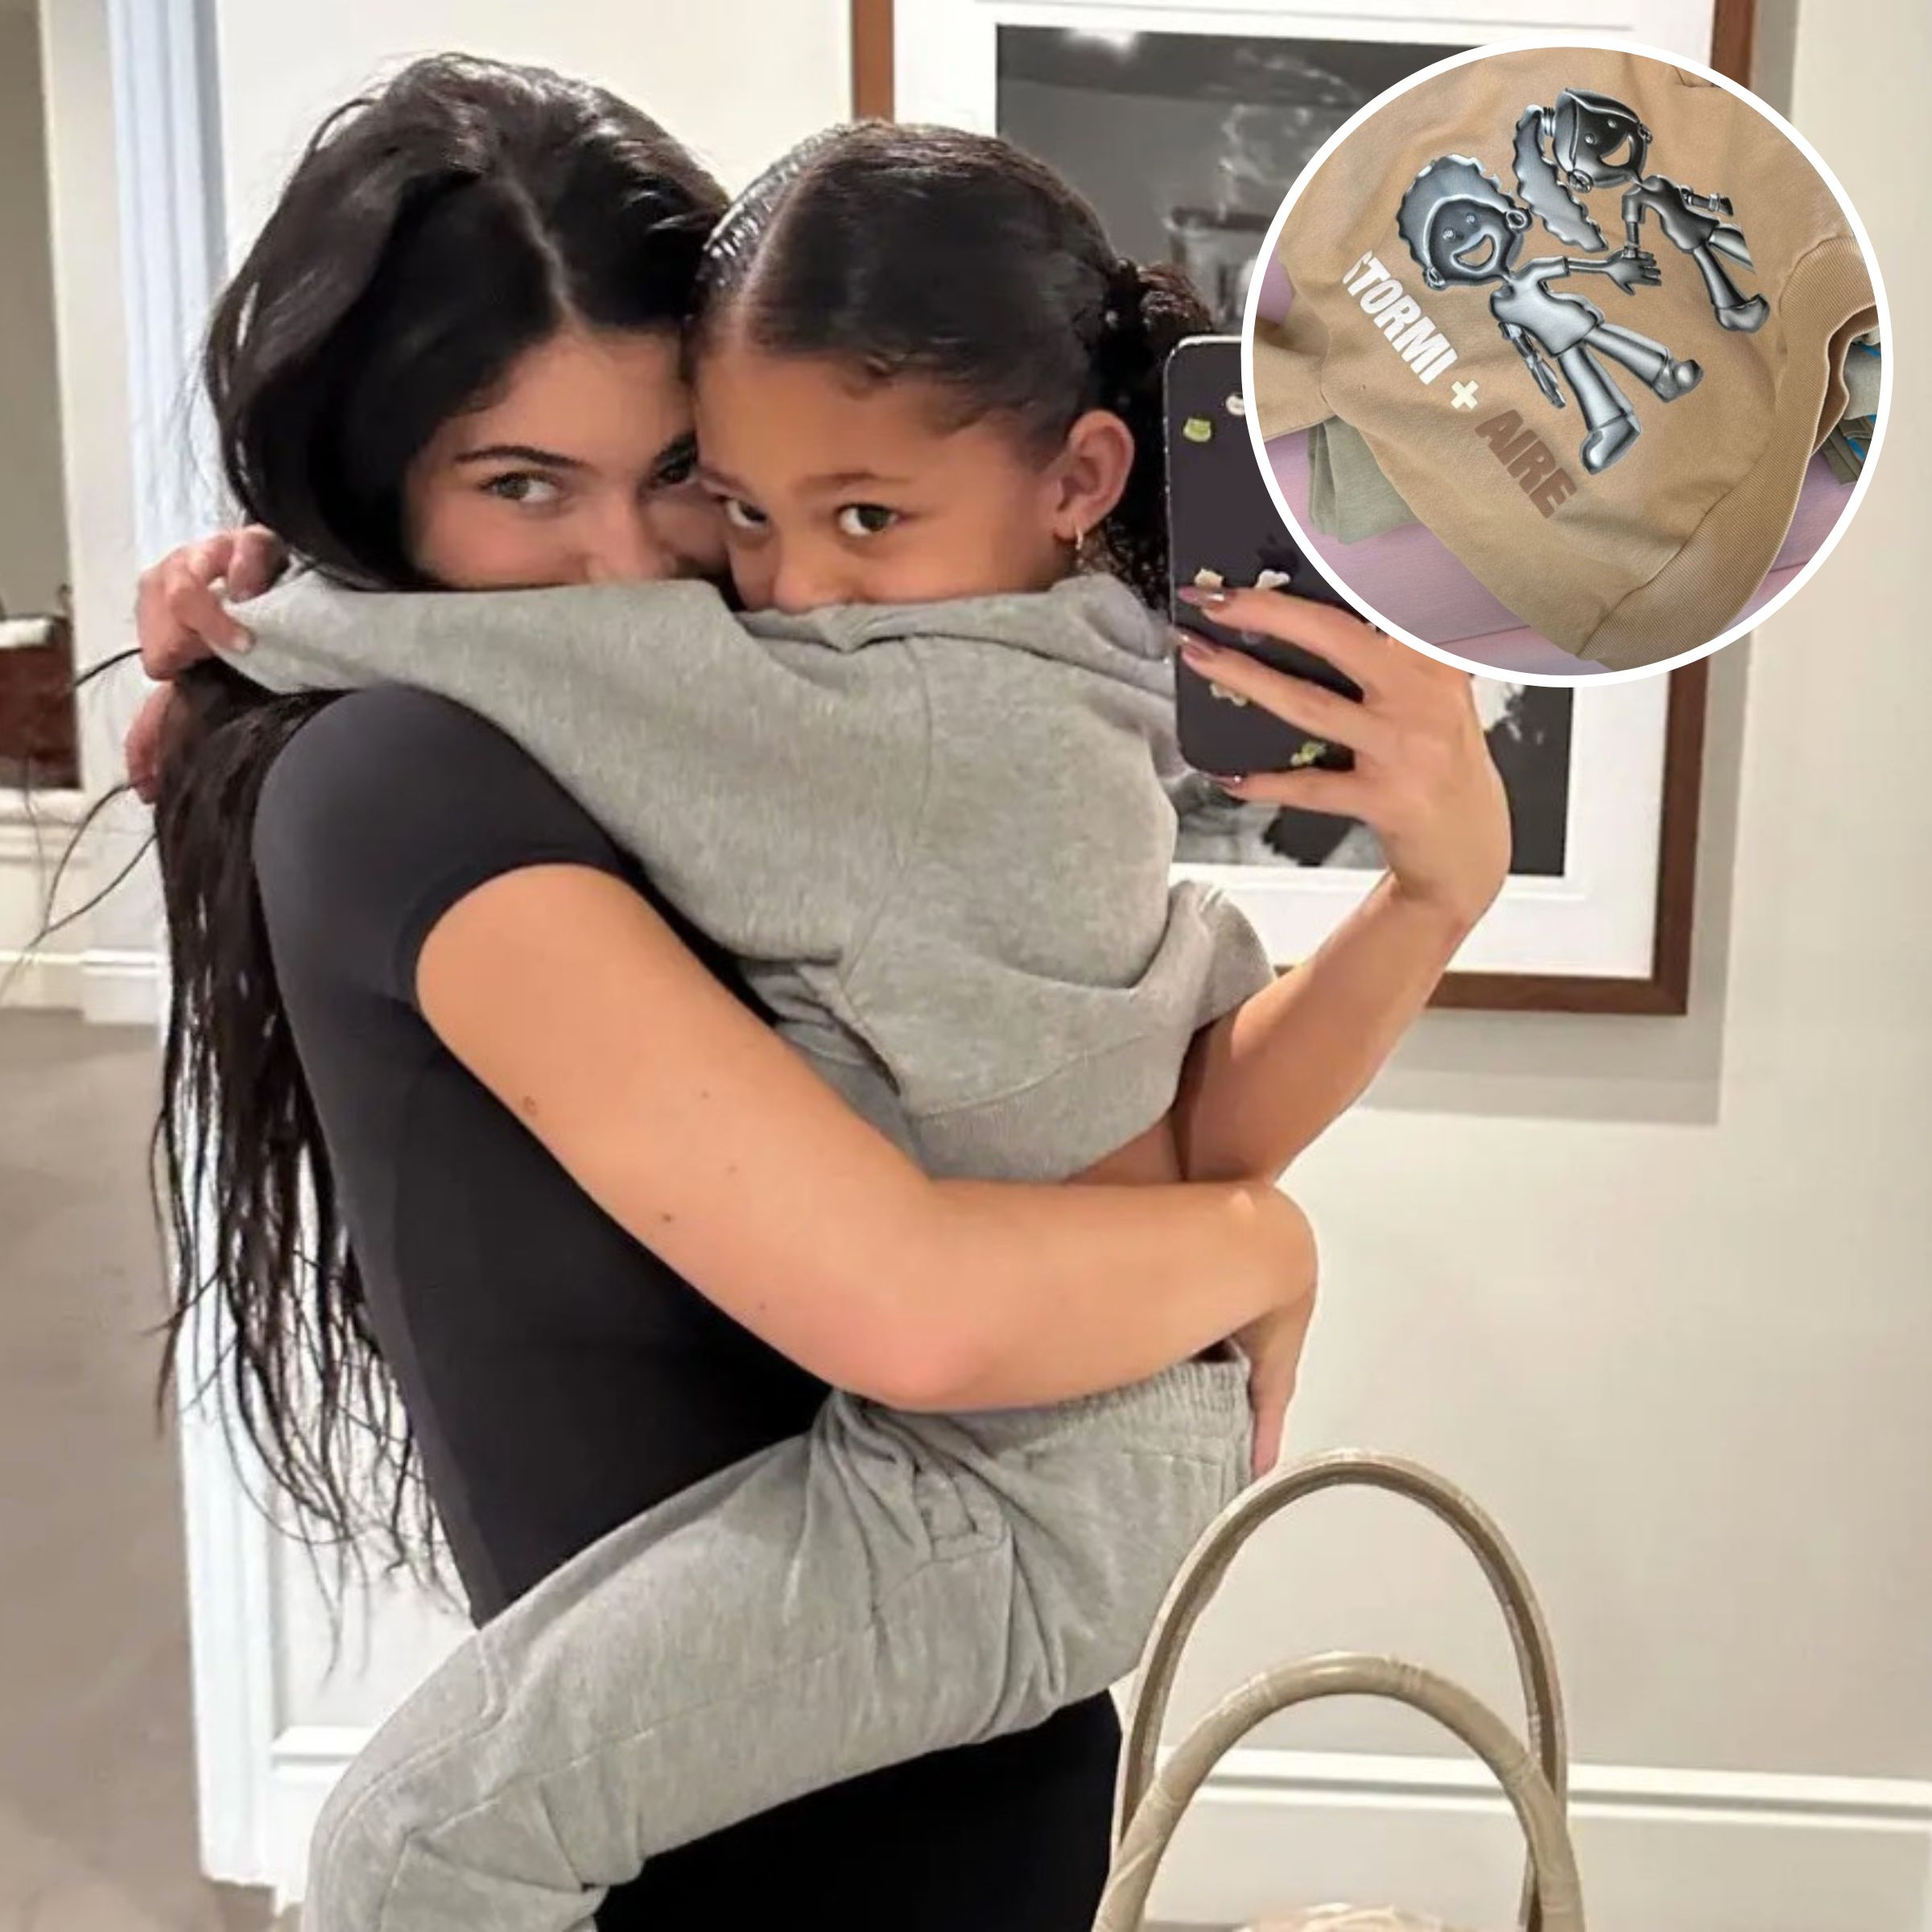 Kylie Jenner Says She's Already Planning Stormi's Second Birthday